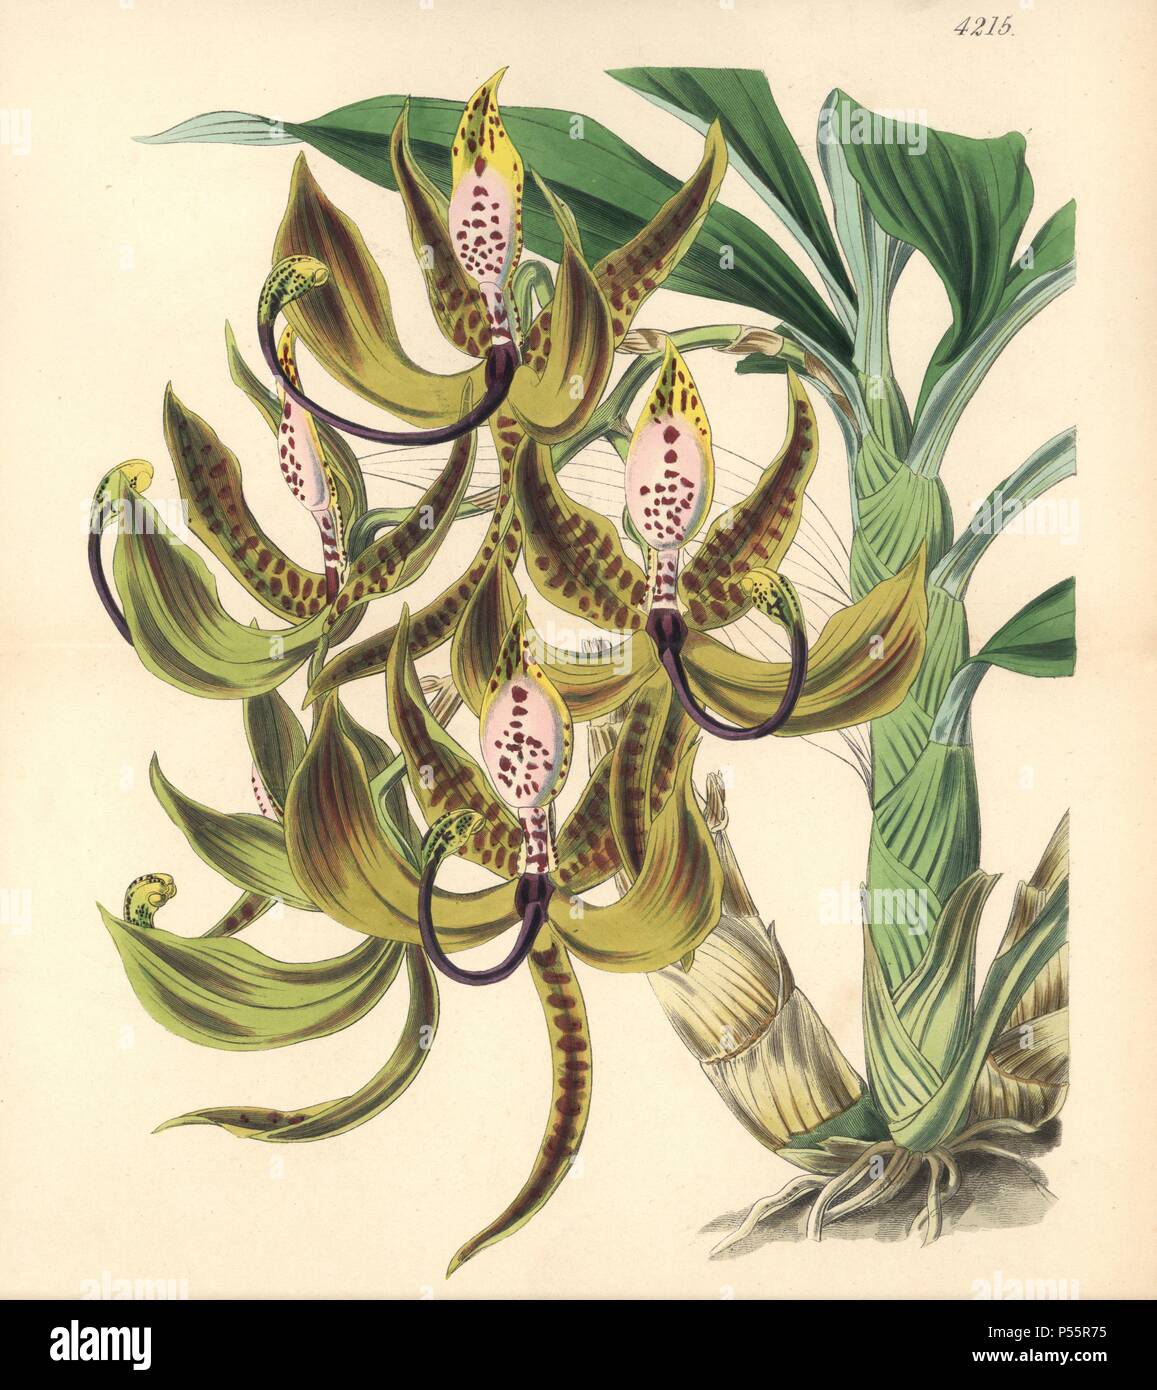 Mr. Loddiges' swan orchid, Cycnoches loddigesii. Hand-coloured botanical illustration drawn and lithographed by Walter Hood Fitch for Sir William Jackson Hooker's 'Curtis's Botanical Magazine,' London, Reeve Brothers, 1846. Fitch (18171892) was a tireless Scottish artist who drew over 2,700 lithographs for the 'Botanical Magazine' starting from 1834. Stock Photo